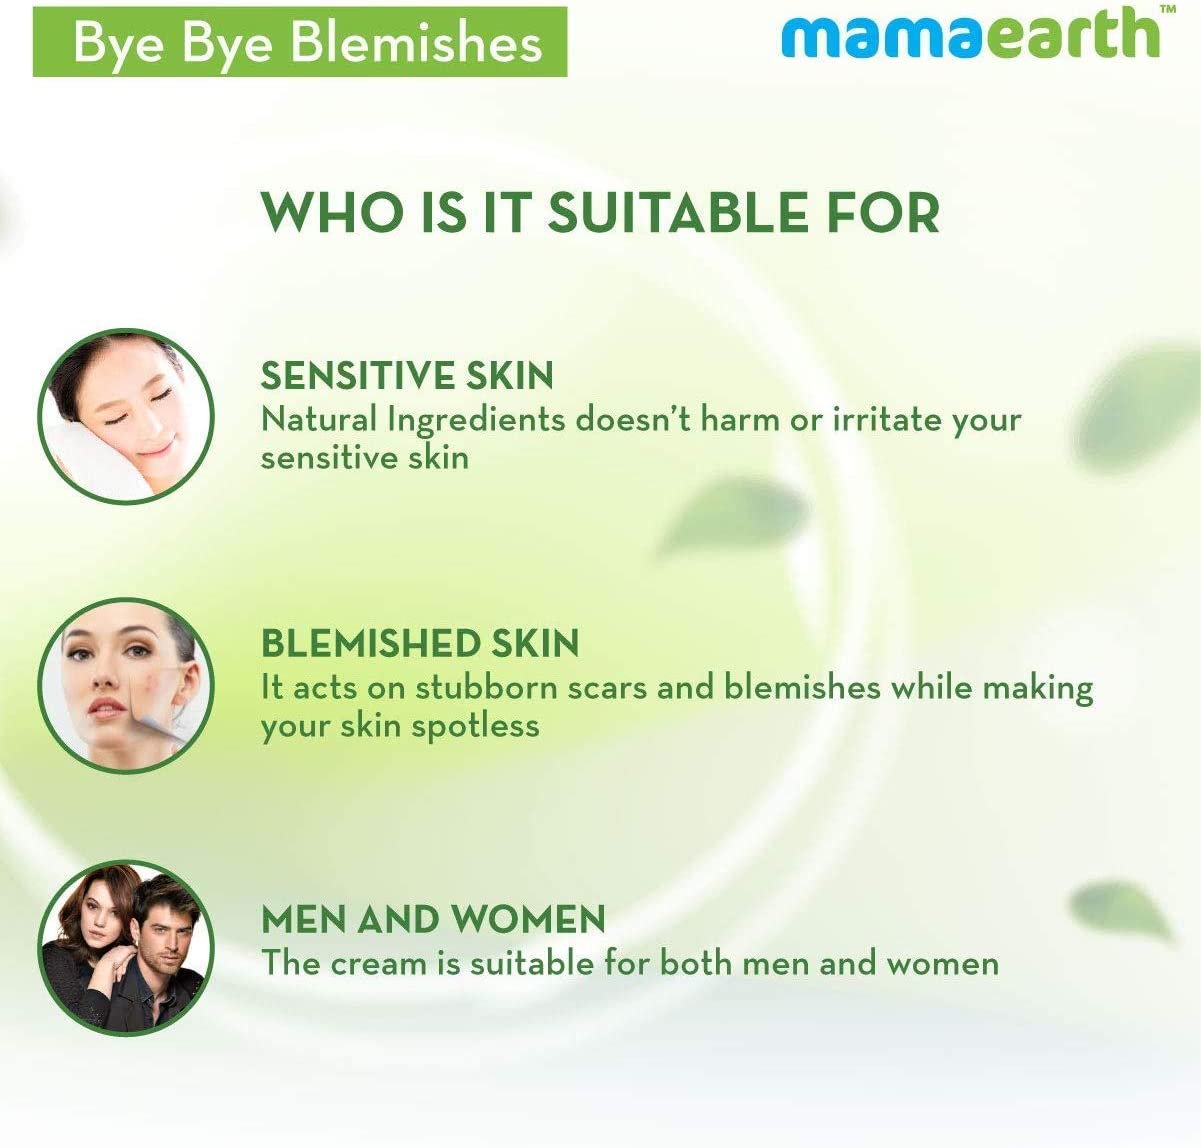 Mamaearth Skin Plump Serum For Face Glow for Ageless Skin - 30ml